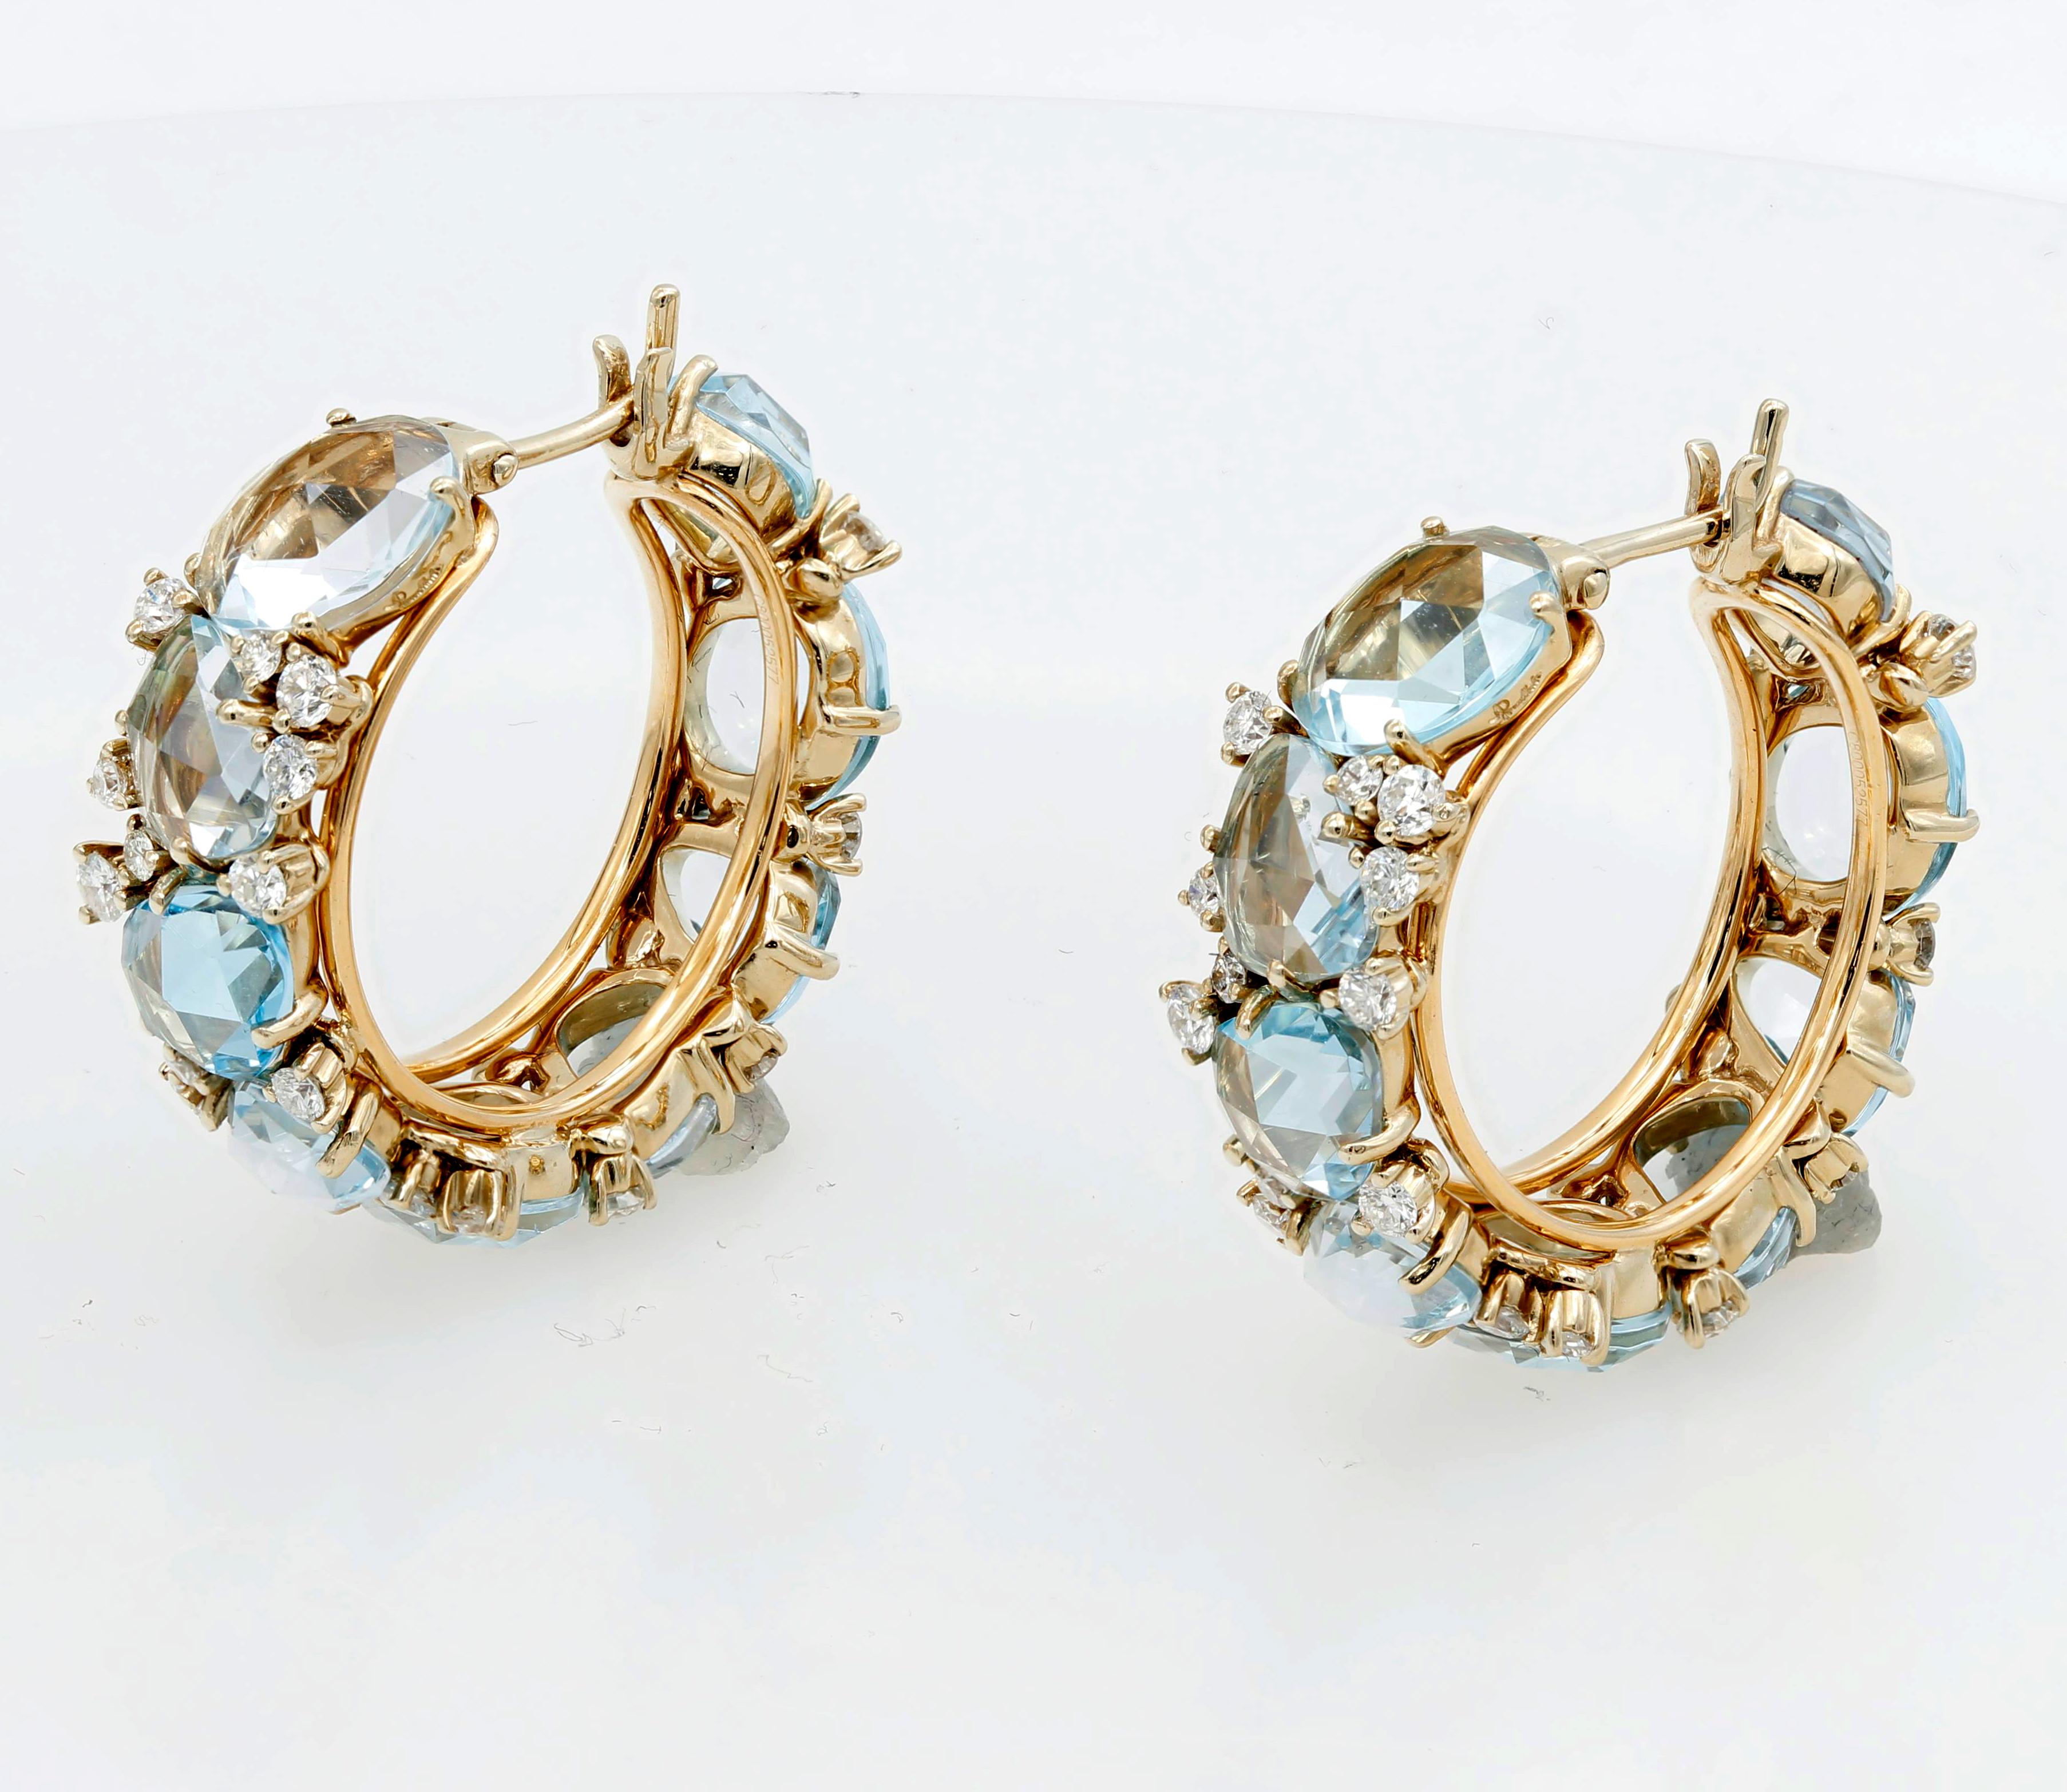 A pair of new impressive hoop earrings, crafted by Pomellato for Lulu collection, decorated with topaz gemstones and diamonds. 

Designer: Pomellato
Material: 18K Gold
Gemstone: G/VS Diamonds - approx. 1.02ctw, Topaz
Dimensions: Hoops are 28mm in